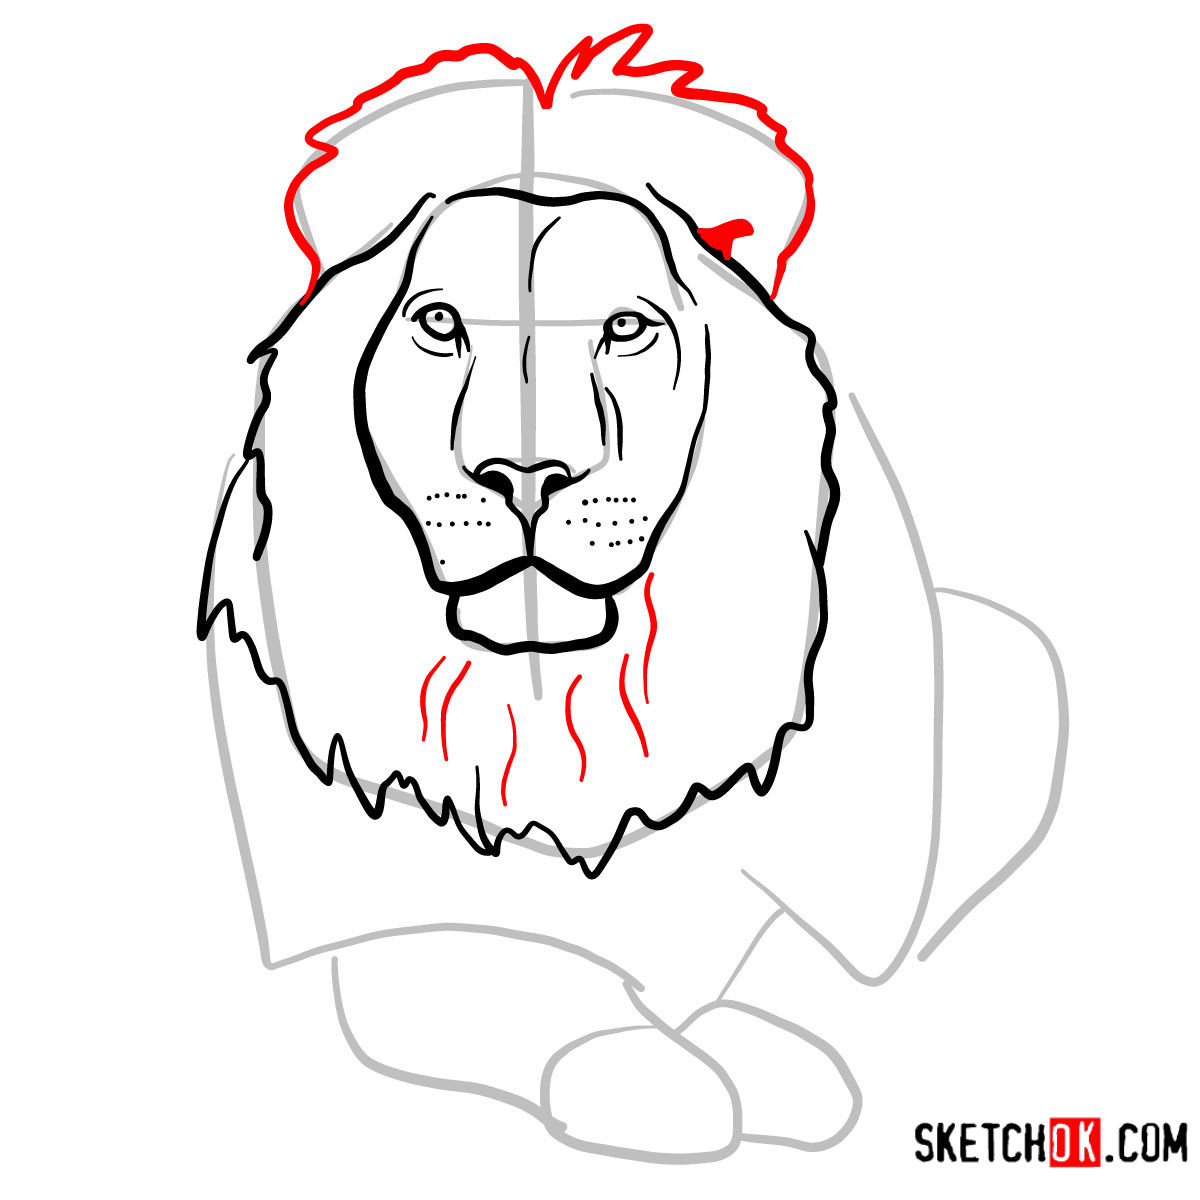 How to draw a Lion’s head | Wild Animals - Sketchok easy drawing guides